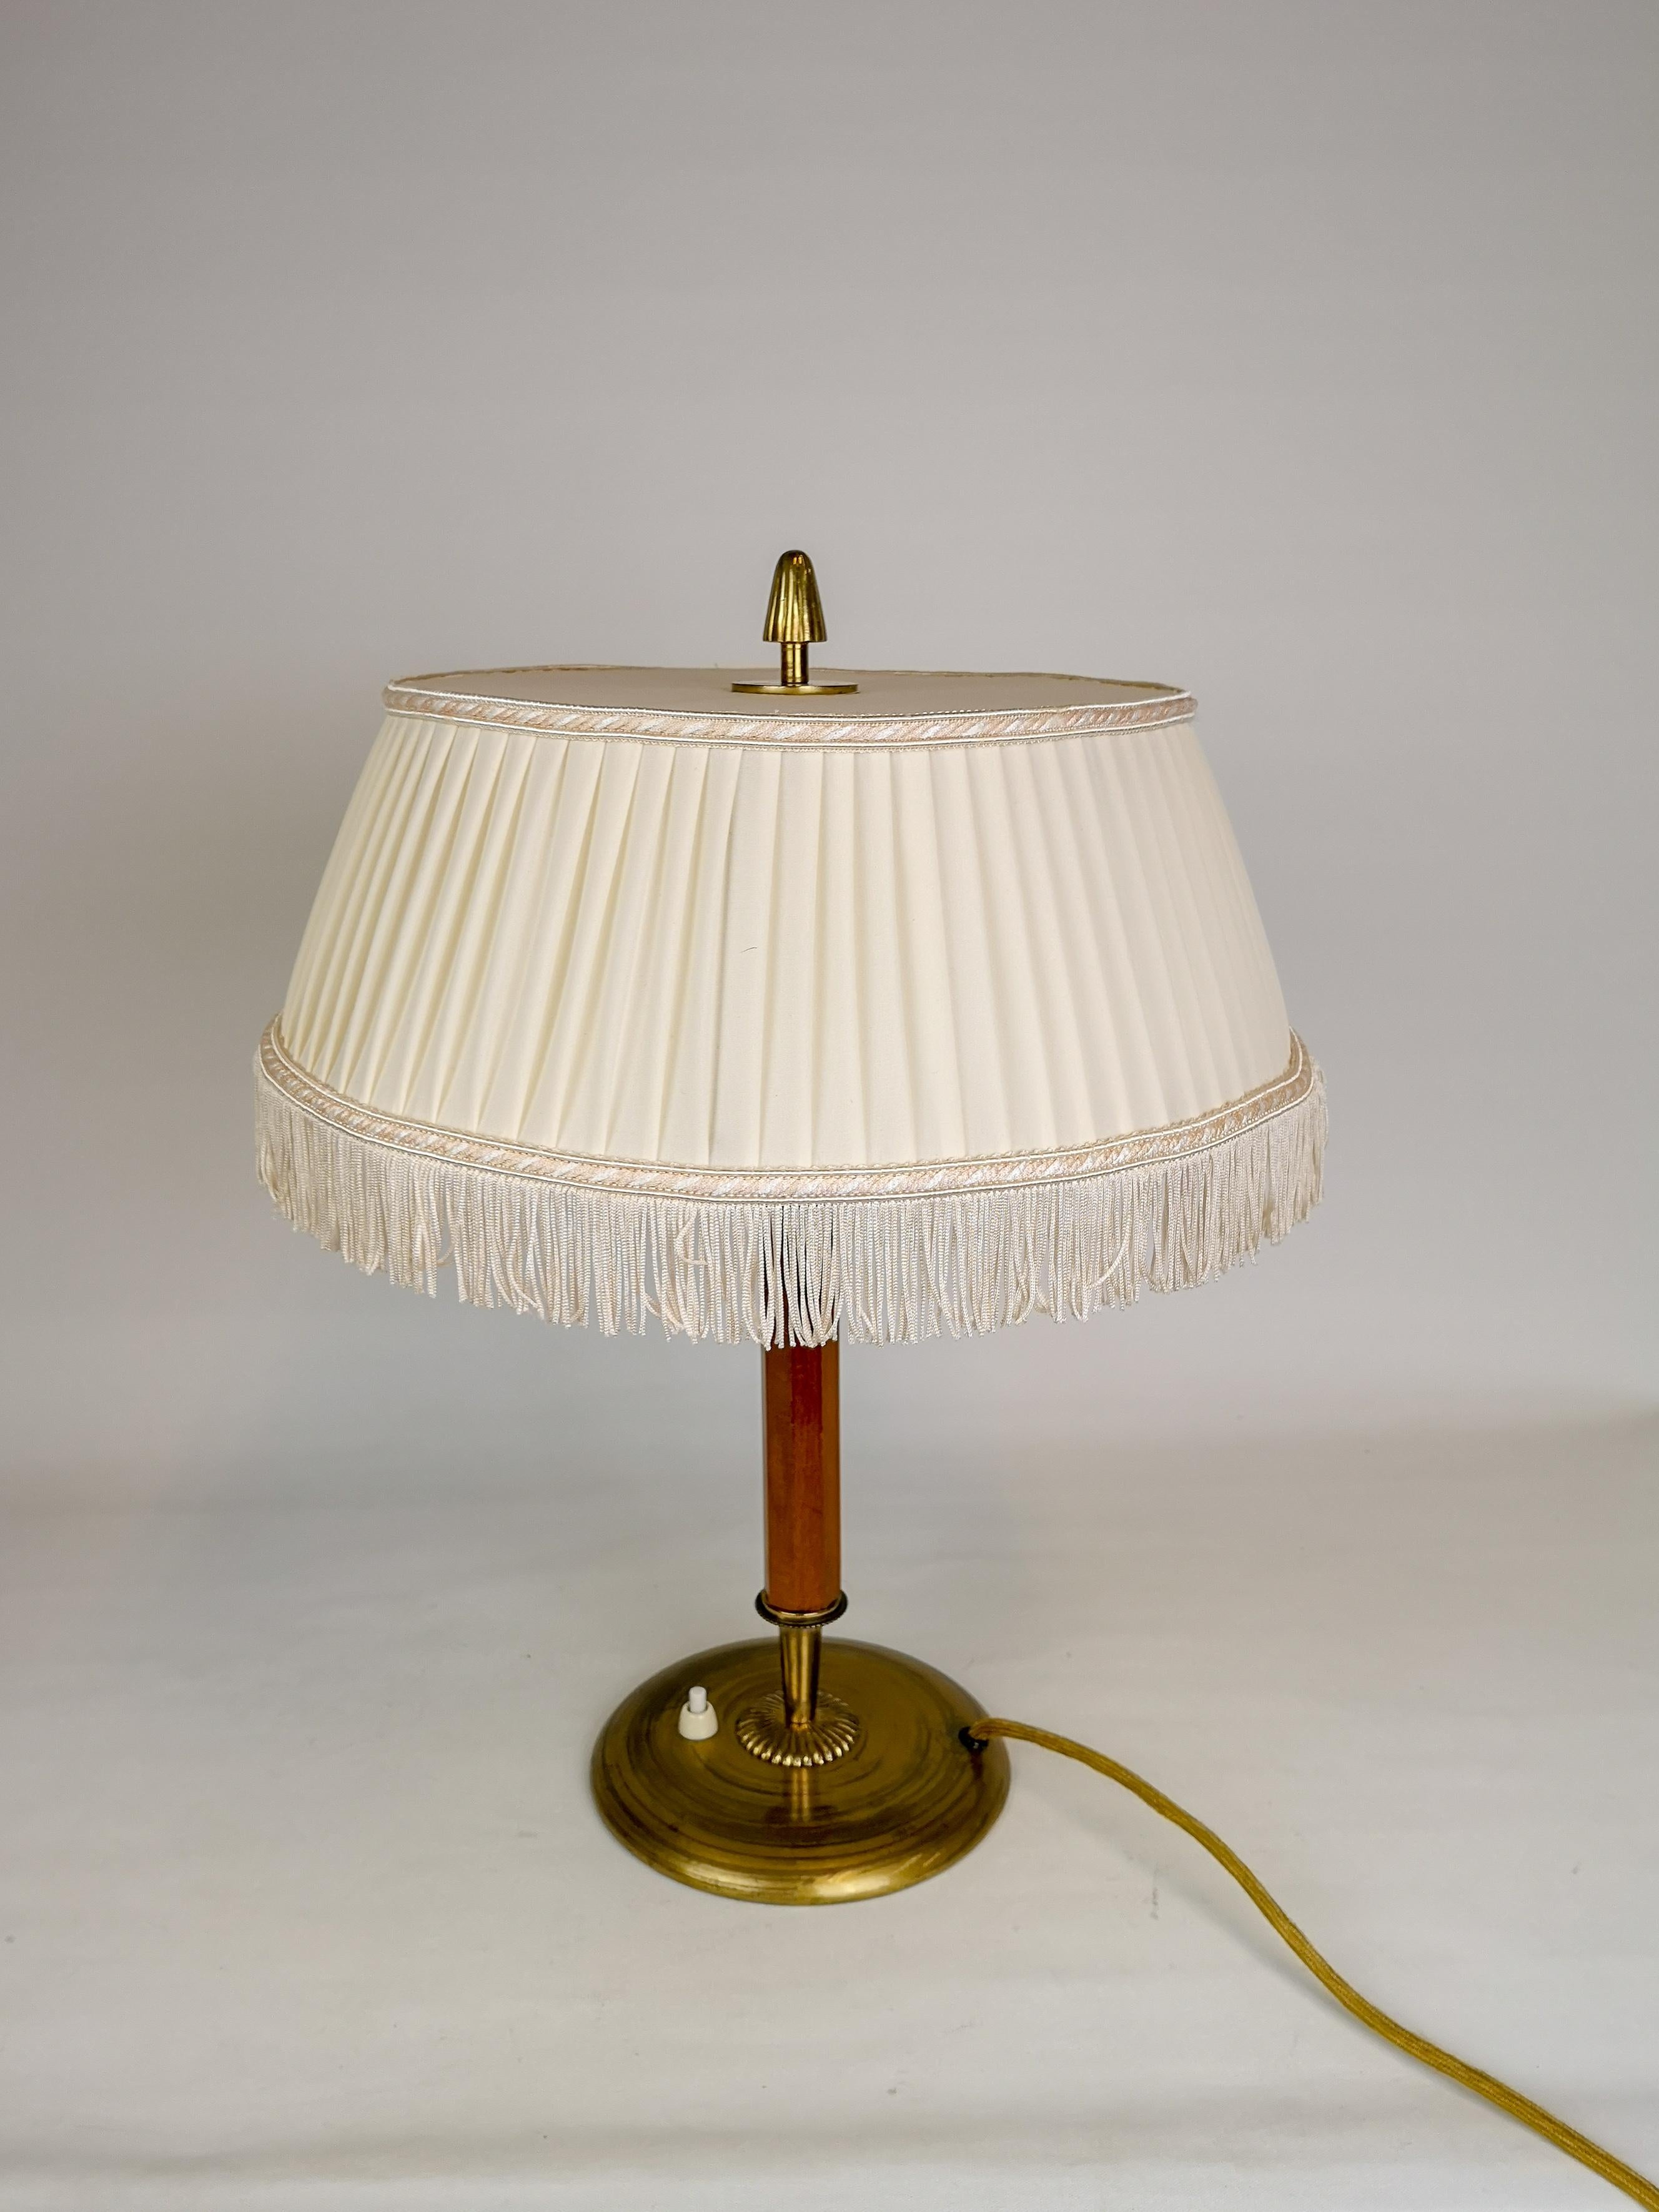 Art Deco table lamp brass and teak, Sweden, 1930s

Nice looking table lamp in Art Deco style. It made from Brass and Teak with an original fringe shade. 

Good vintage condition. 

Measures H 44 cm, D Shade 35 cm, D Foot 17 cm.
   